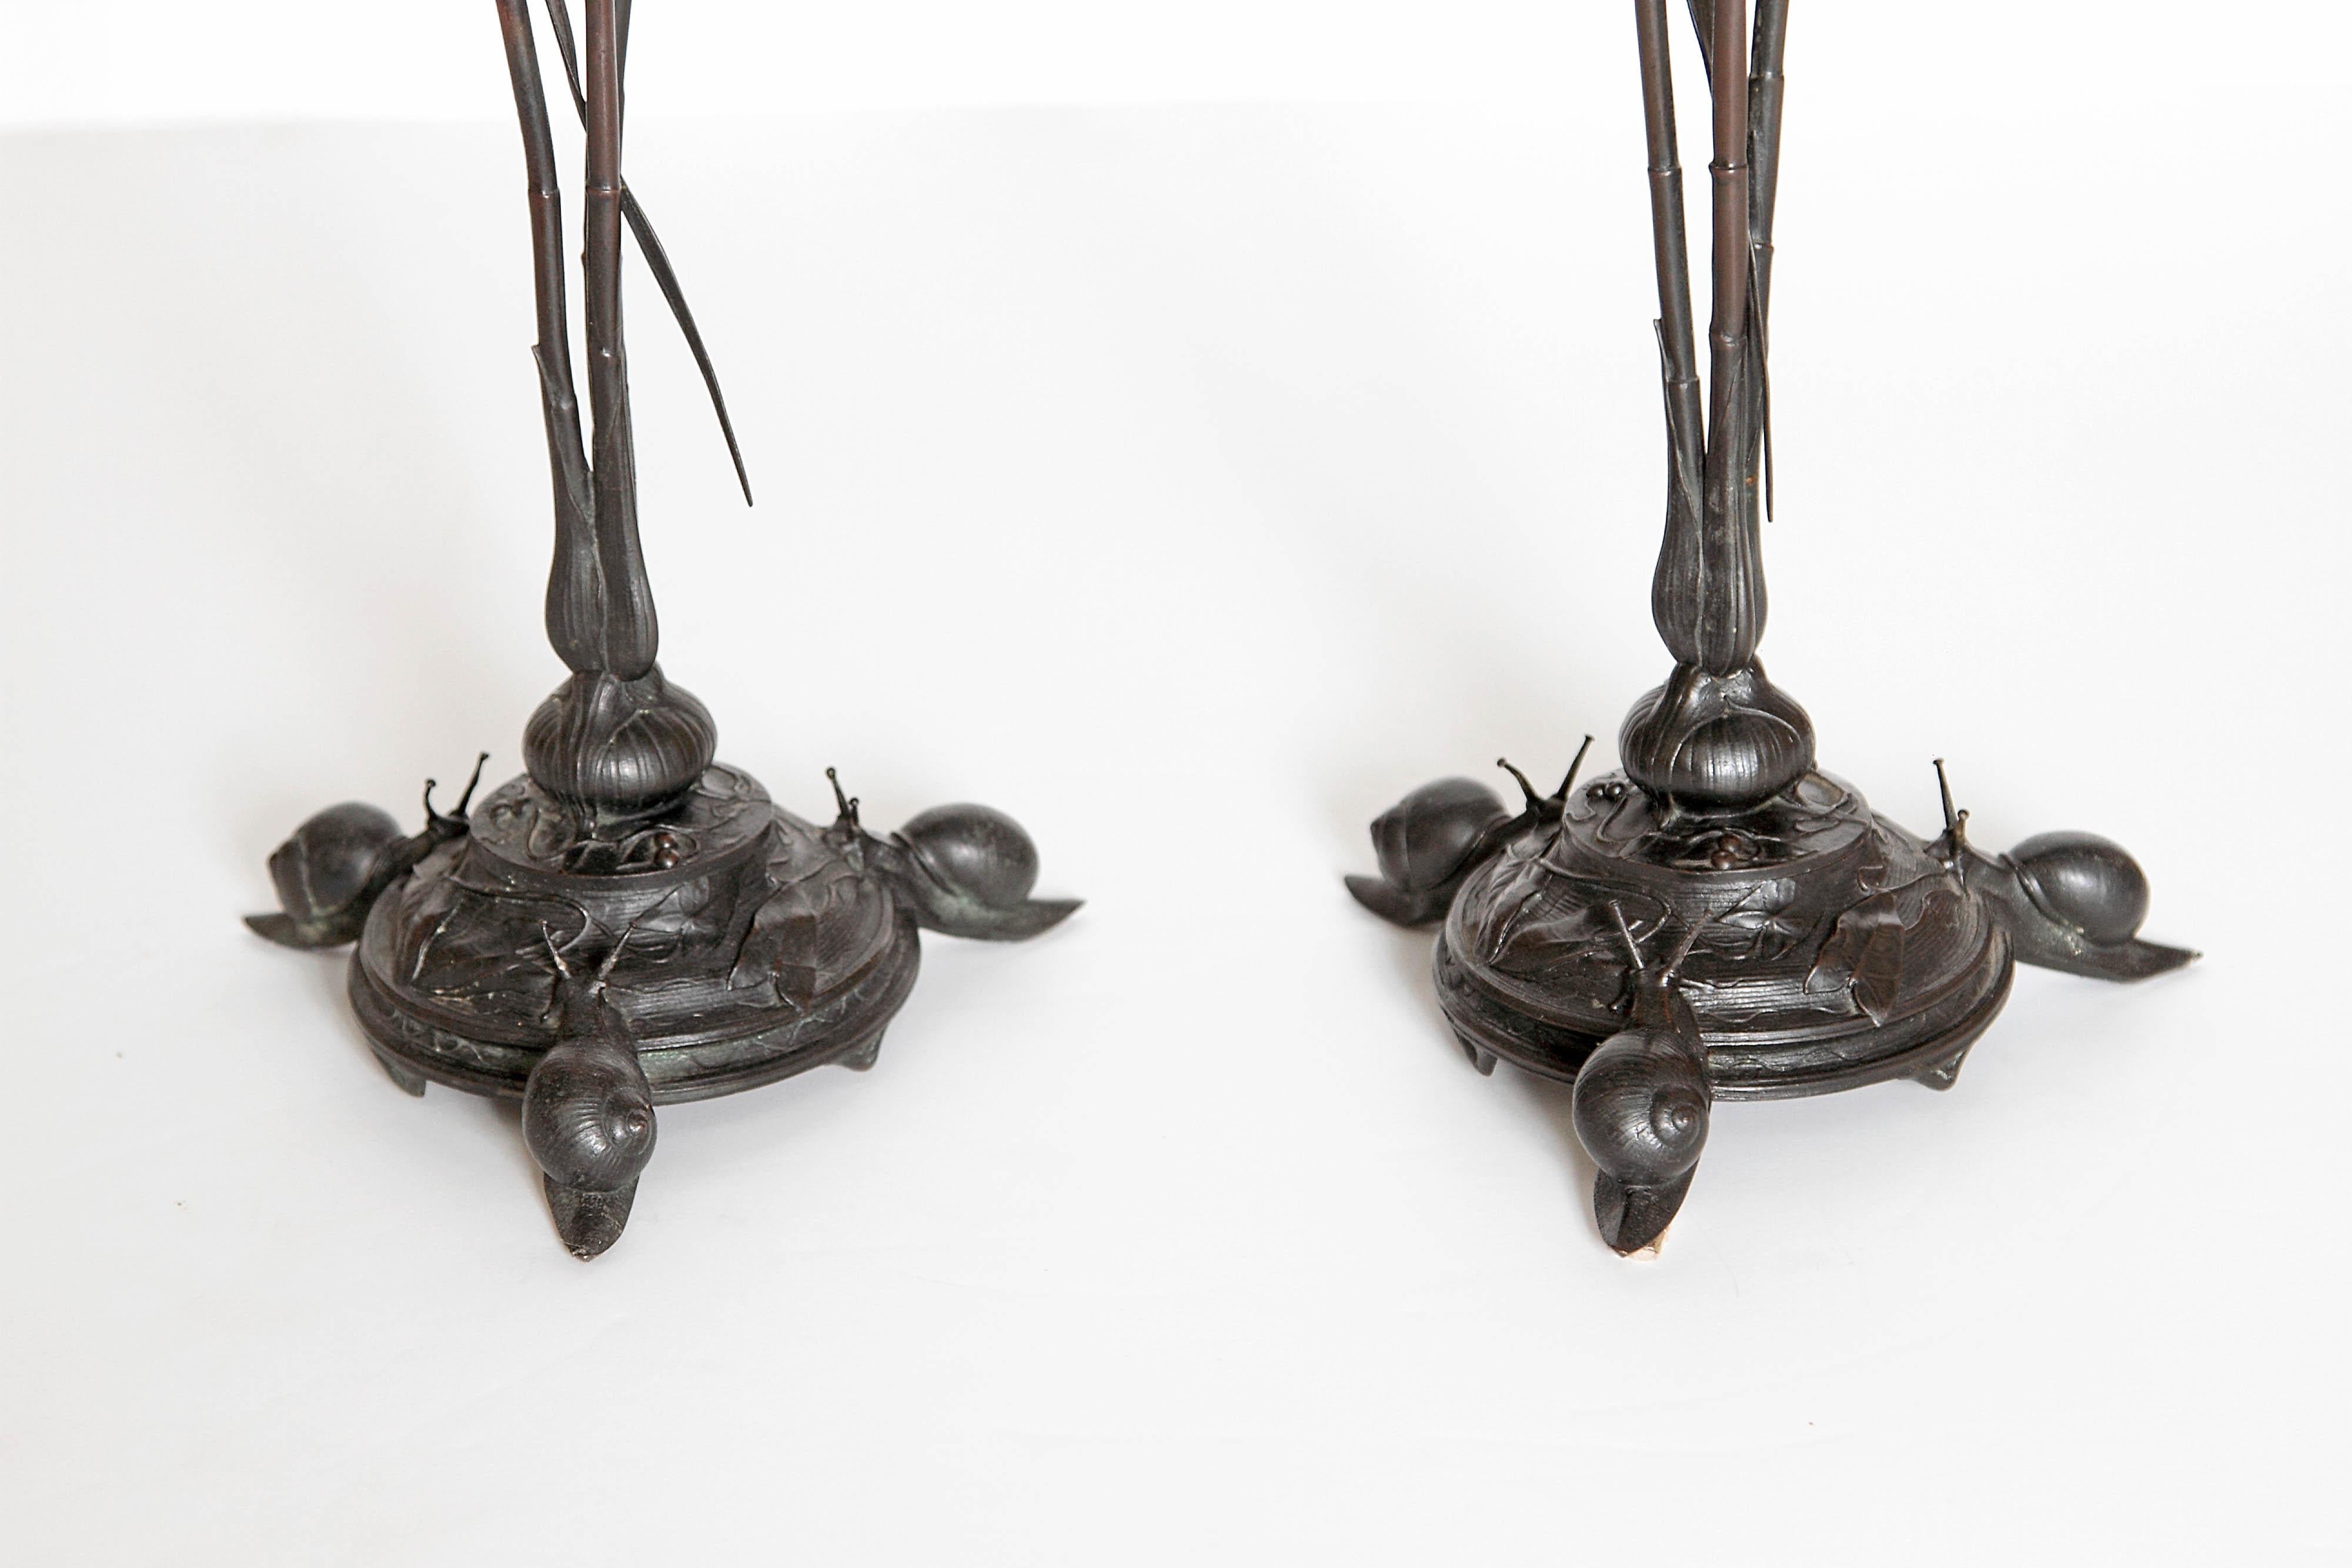 Auguste-Nicolas Cain, Pair of French Candelabra with Bird's Nest 1